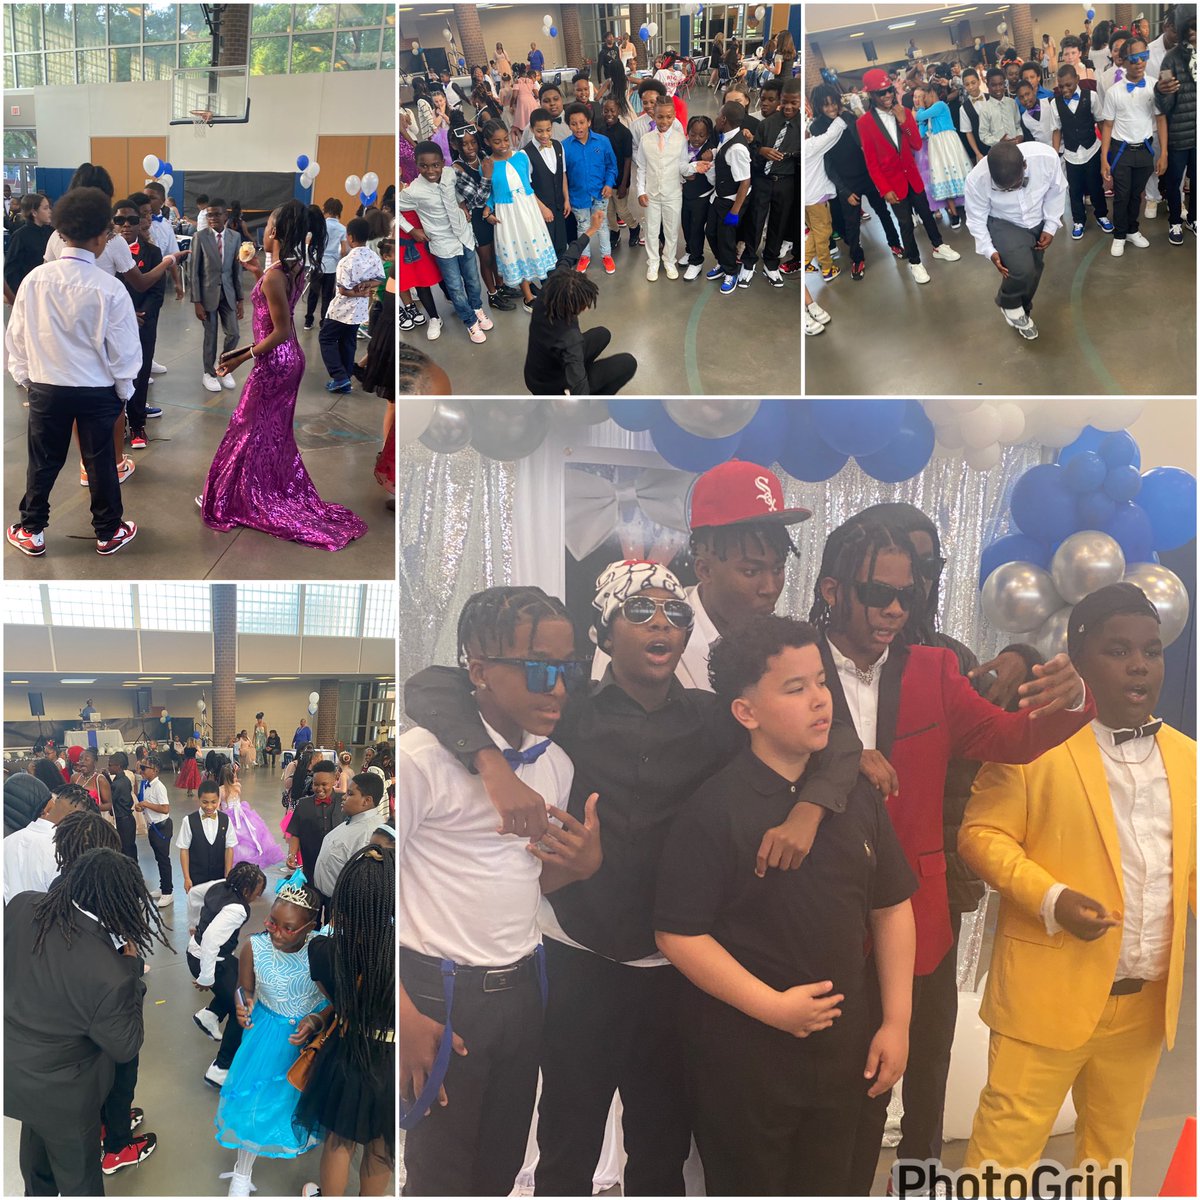 About last night!! The 2023 Sneaker Ball at Cradock Elementary School was another HUGE success!! 🎉 What a way to close out the school year!! And we’re not done yet! #EagleNation #CRES #PPS #SneakerBall @JolleyLa @MrsFergusonCrES @PortsVASchools